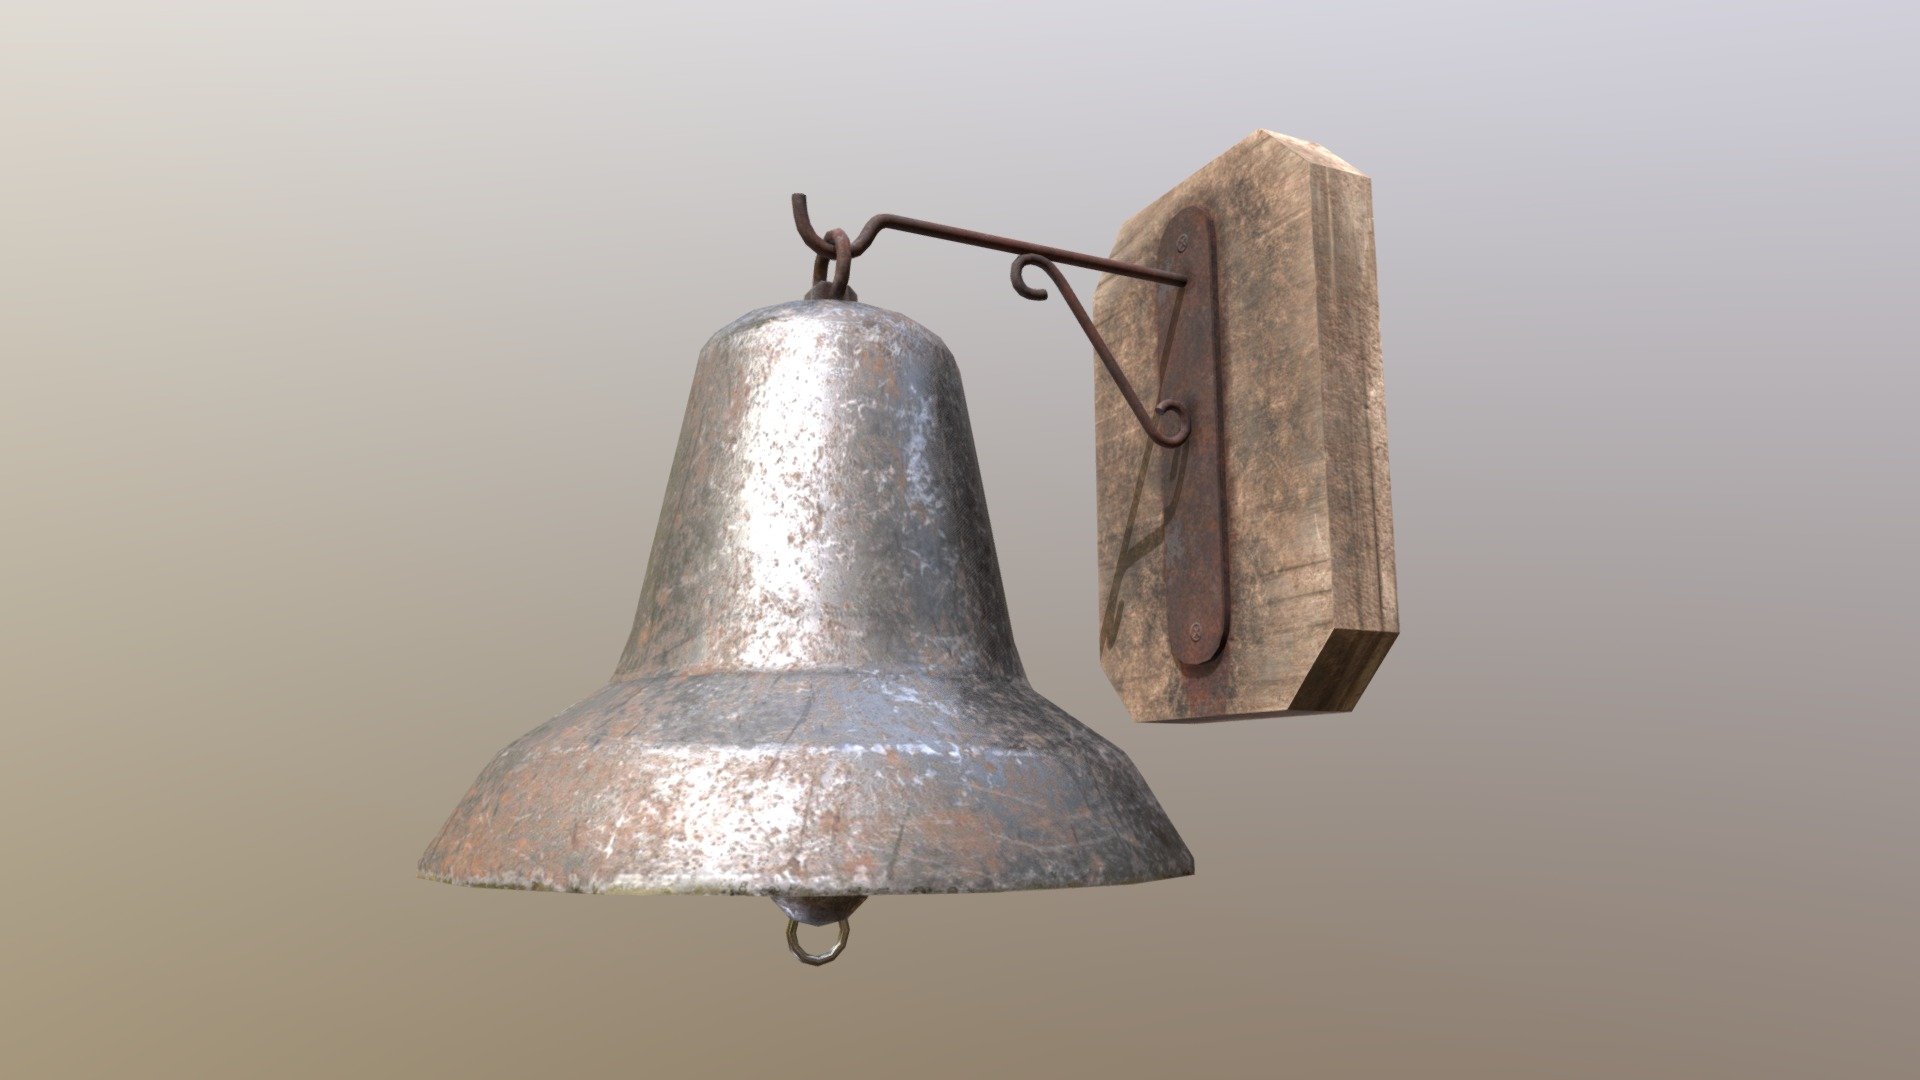 Modeling, UV - 3D Max 
Texturing - Substance painter

1850 Tris, 920 polys - Old rusty bell - Download Free 3D model by kenergy 3d model